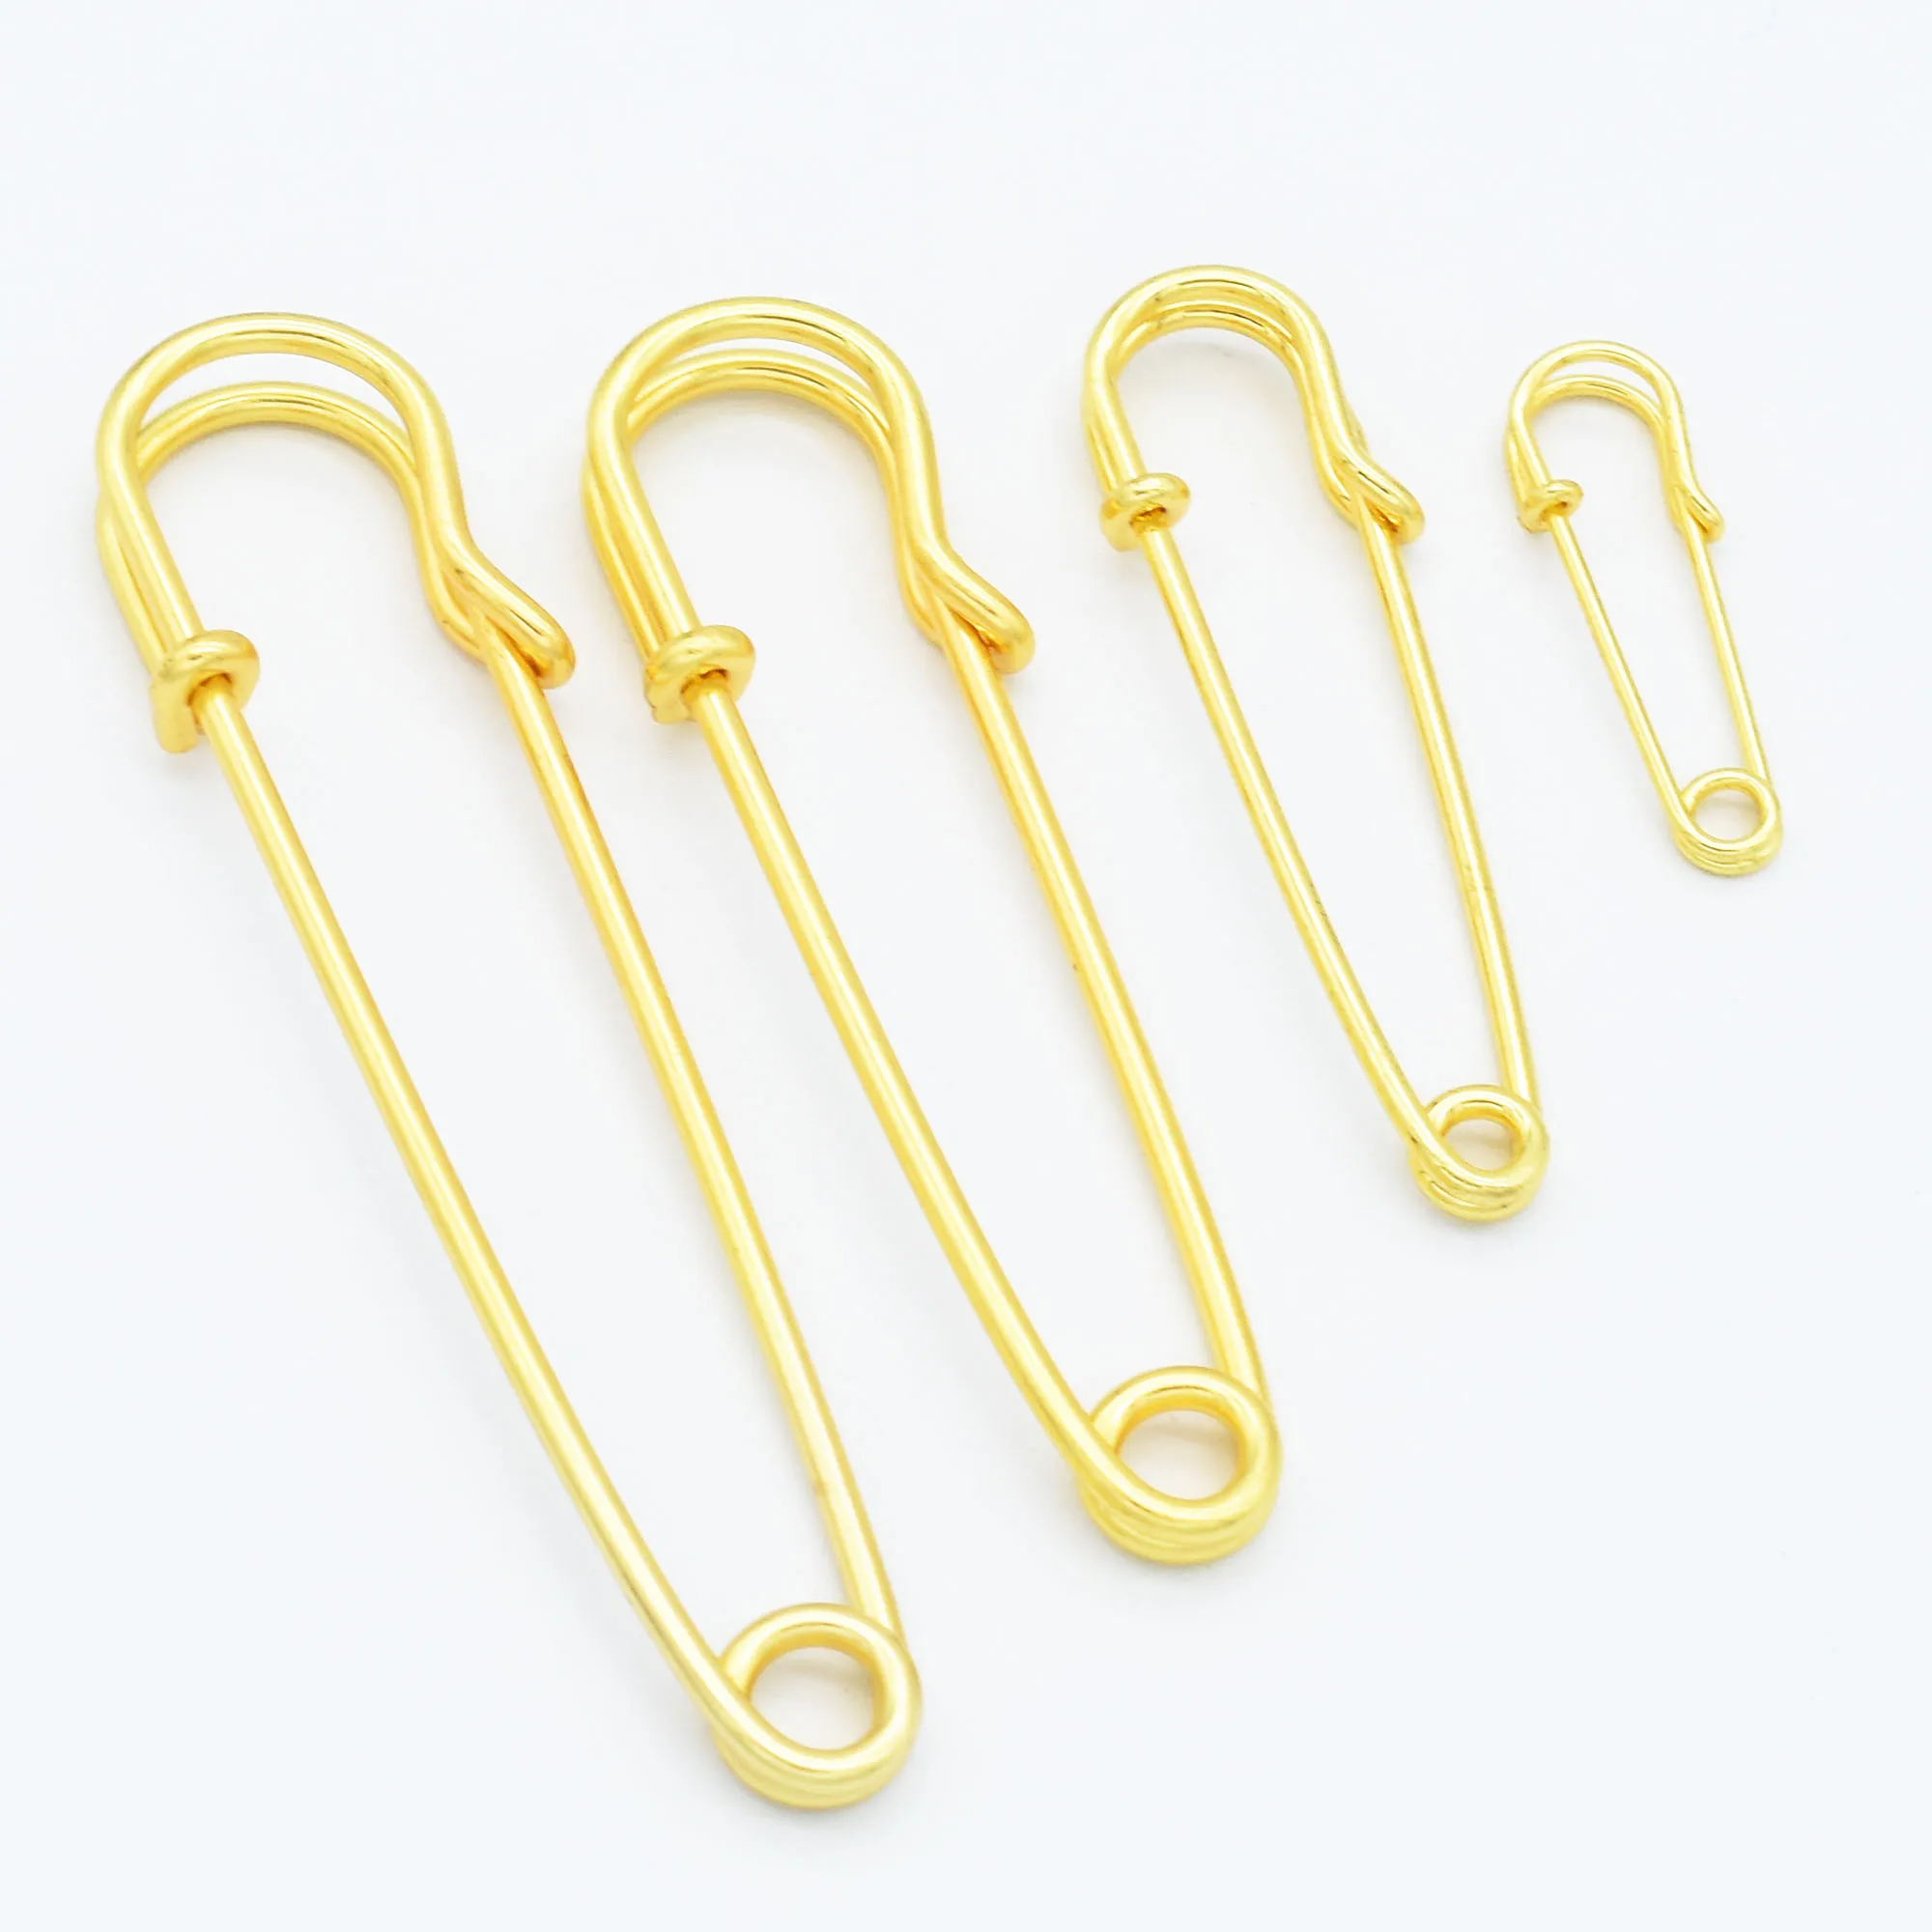 

Gold Safety Pins Brooch Decorative Pins Charms for Jewelry Kilt Knitted Fasteners Used in Clothes Hats Skirts Dresses 12 PCS